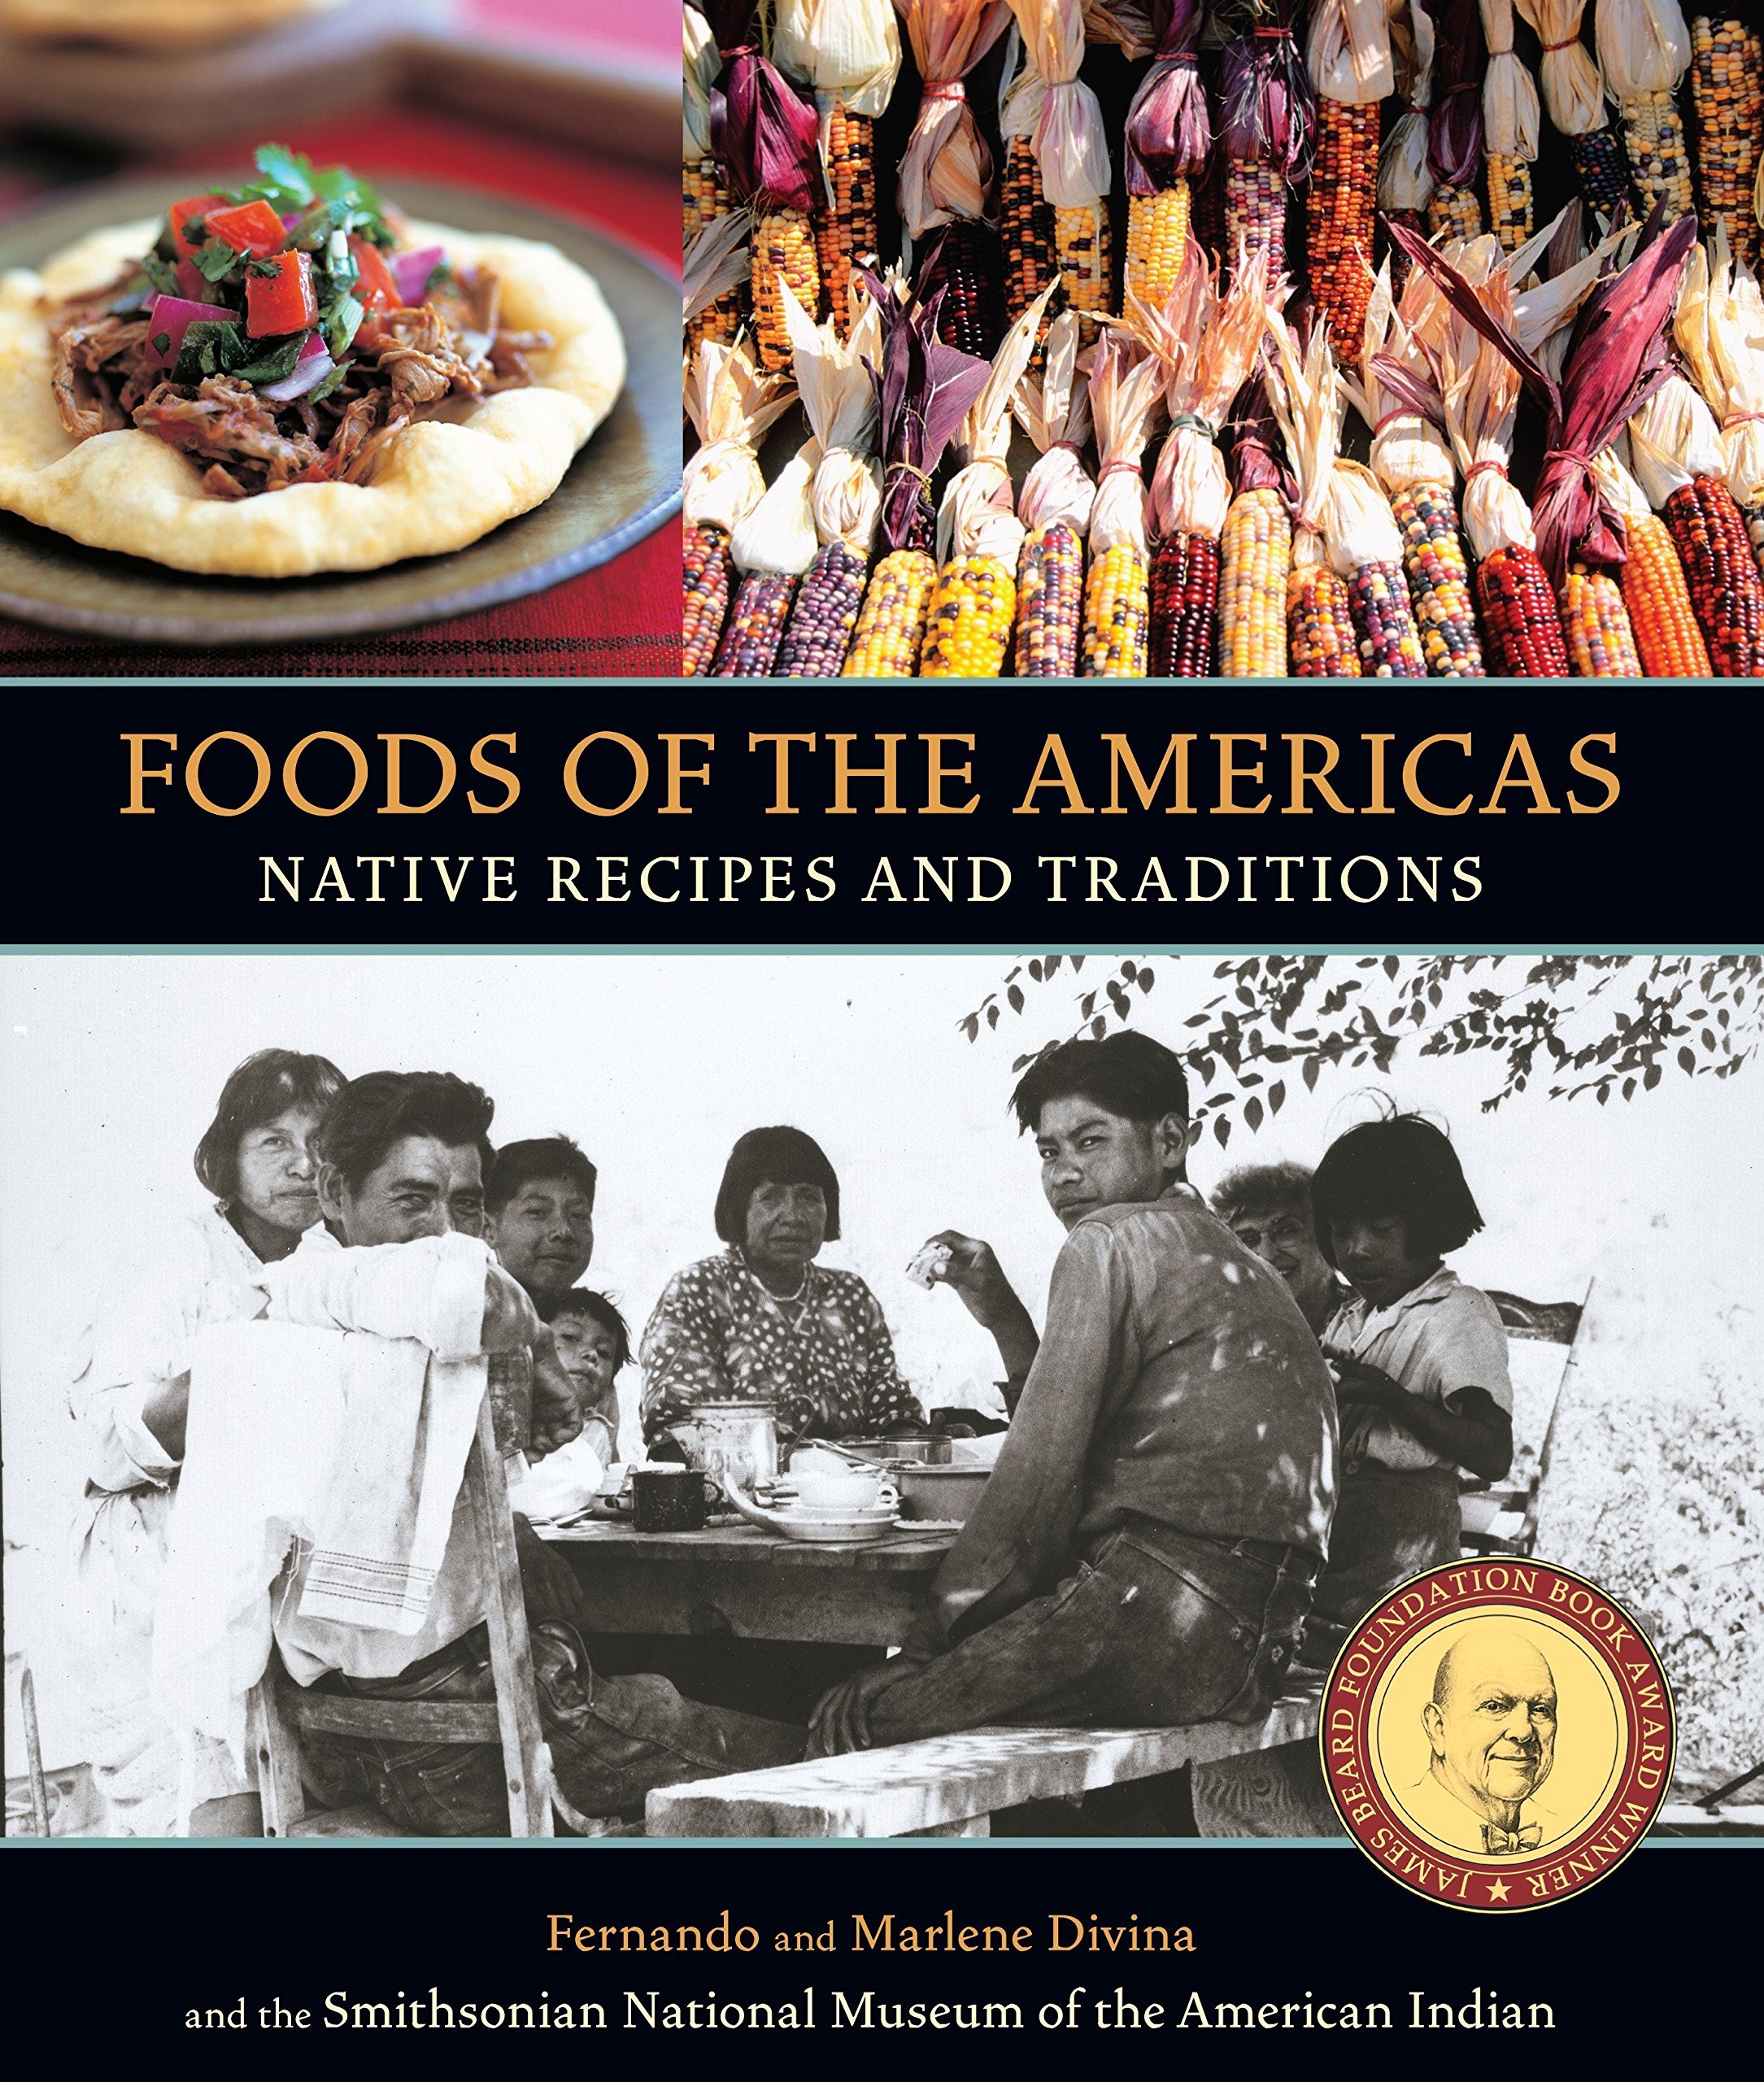 History and traditions. Еда в Америке книга. American Recipes tradition.